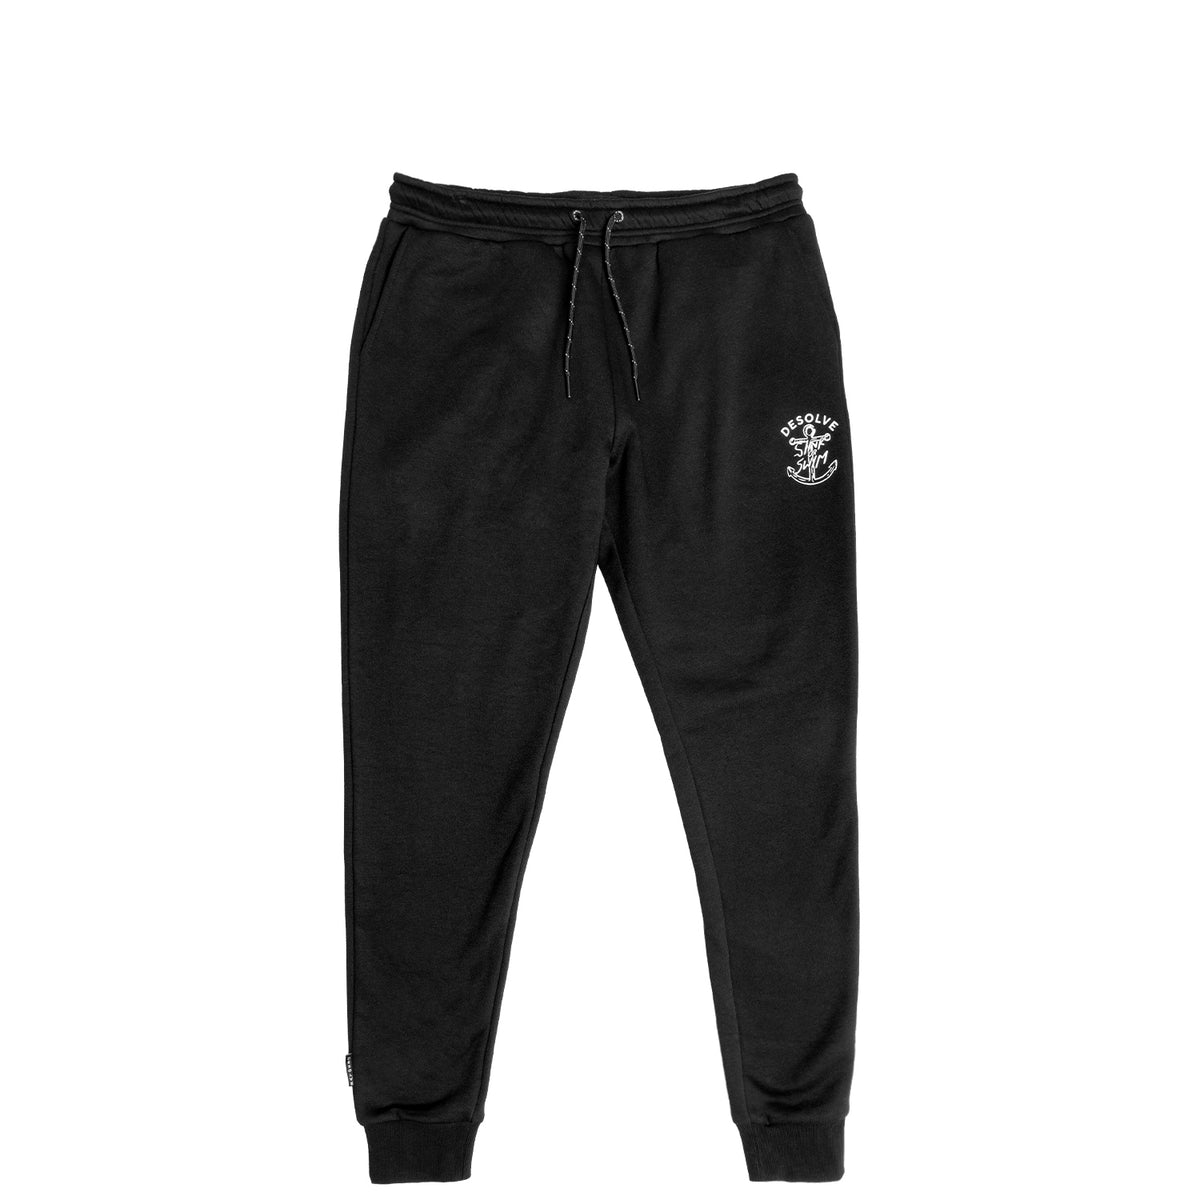 Joggers vs Sweatpants: Which Should You Go For? [2023]